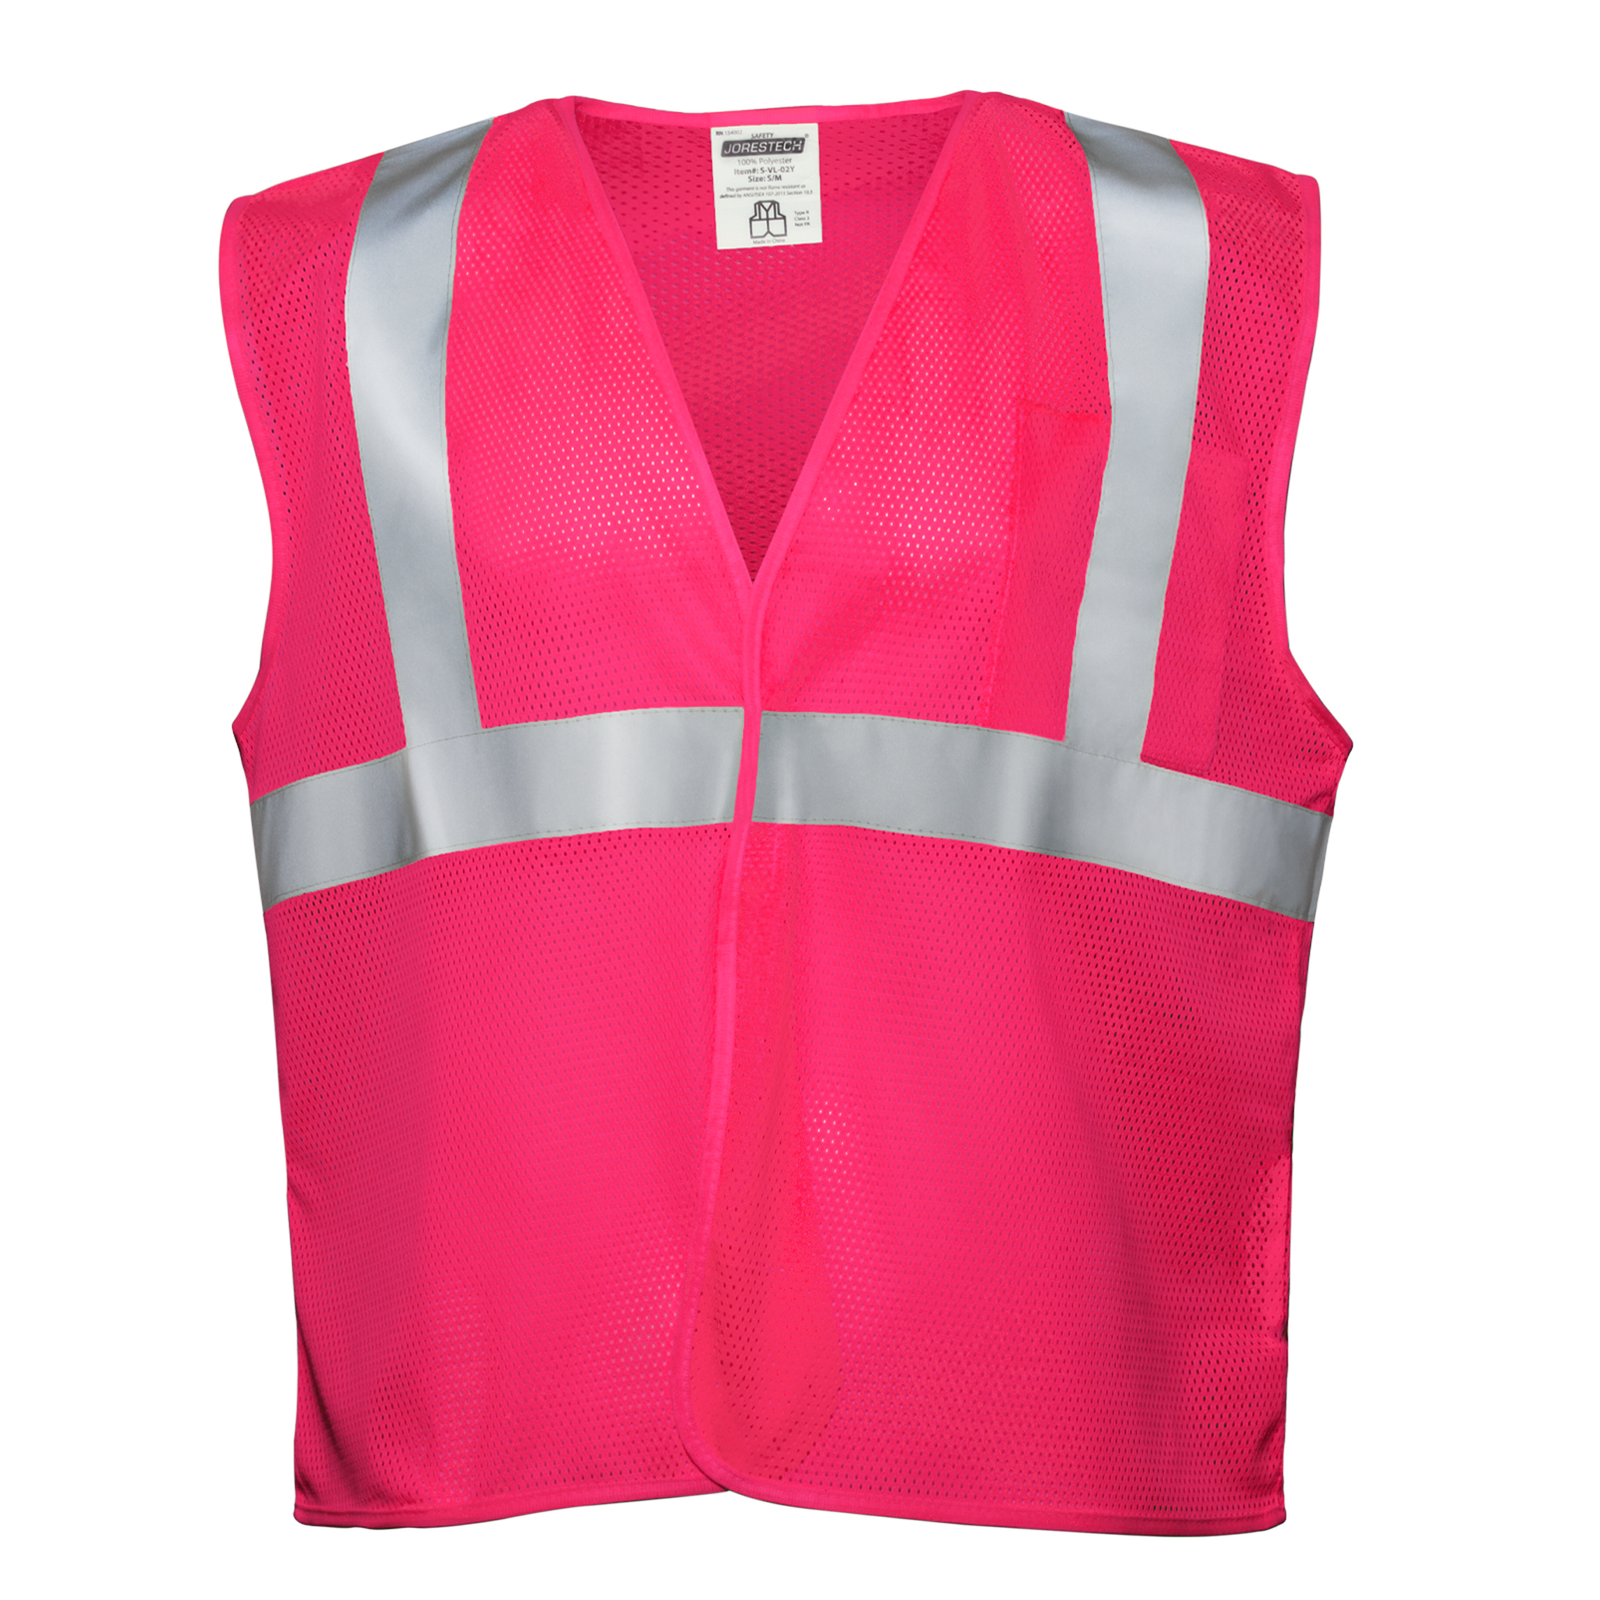 Front view of the pink JORESTECH printed hi-vis mesh safety vest with 2 inches reflective strips.